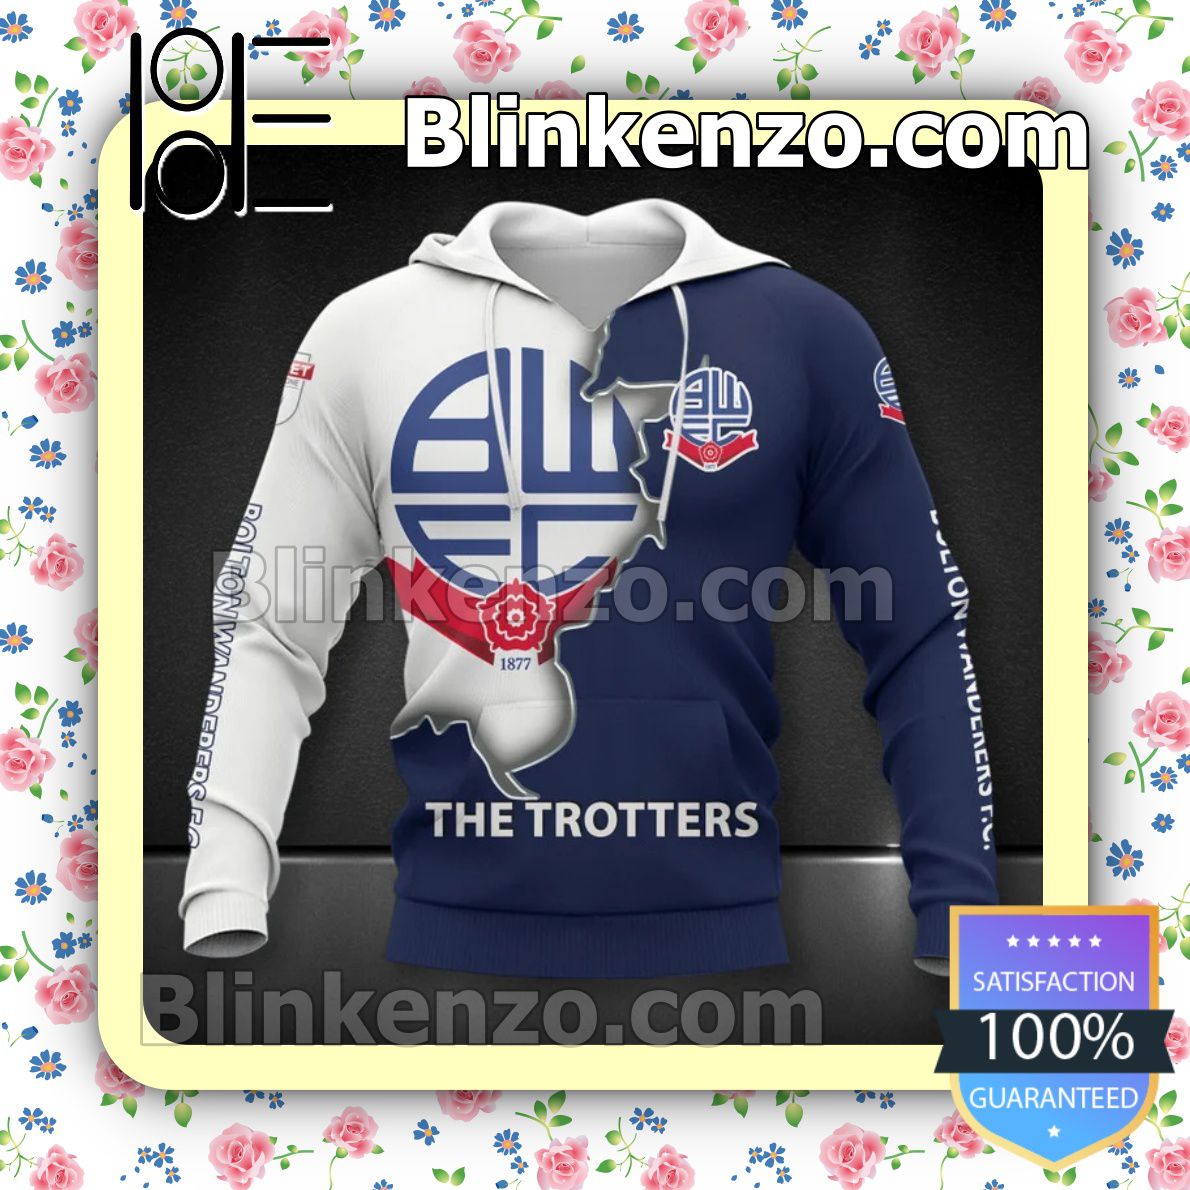 Awesome Bolton Wanderers FC The Trotters Men T-shirt, Hooded Sweatshirt